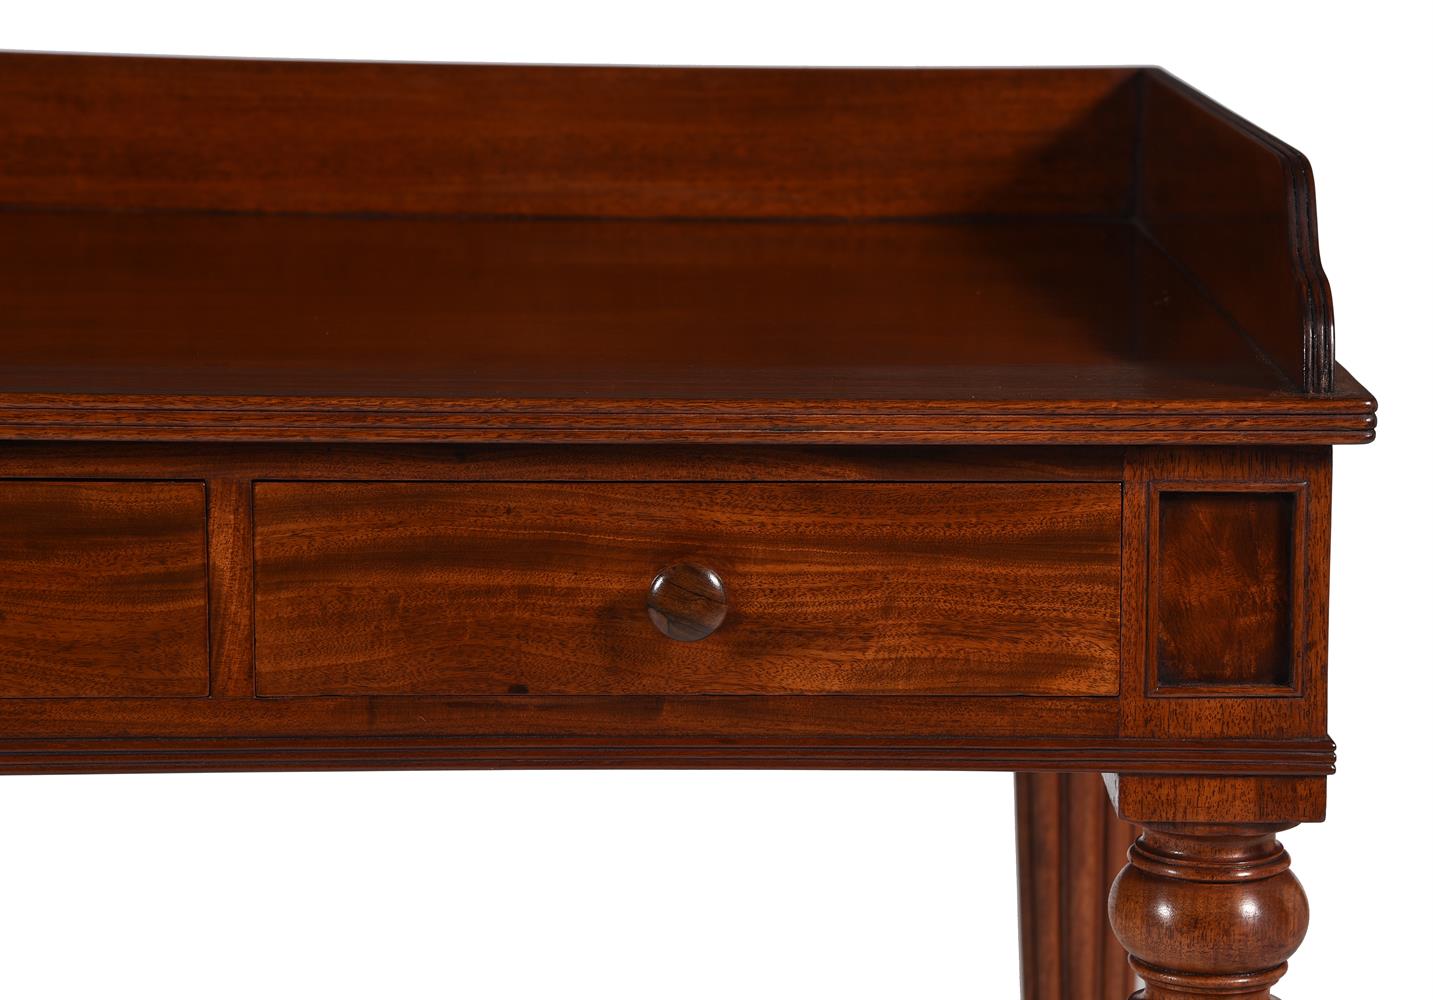 Y A GEORGE IV MAHOGANY DRESSING TABLE, IN THE MANNER OF GILLOWS, CIRCA 1825 - Image 5 of 5